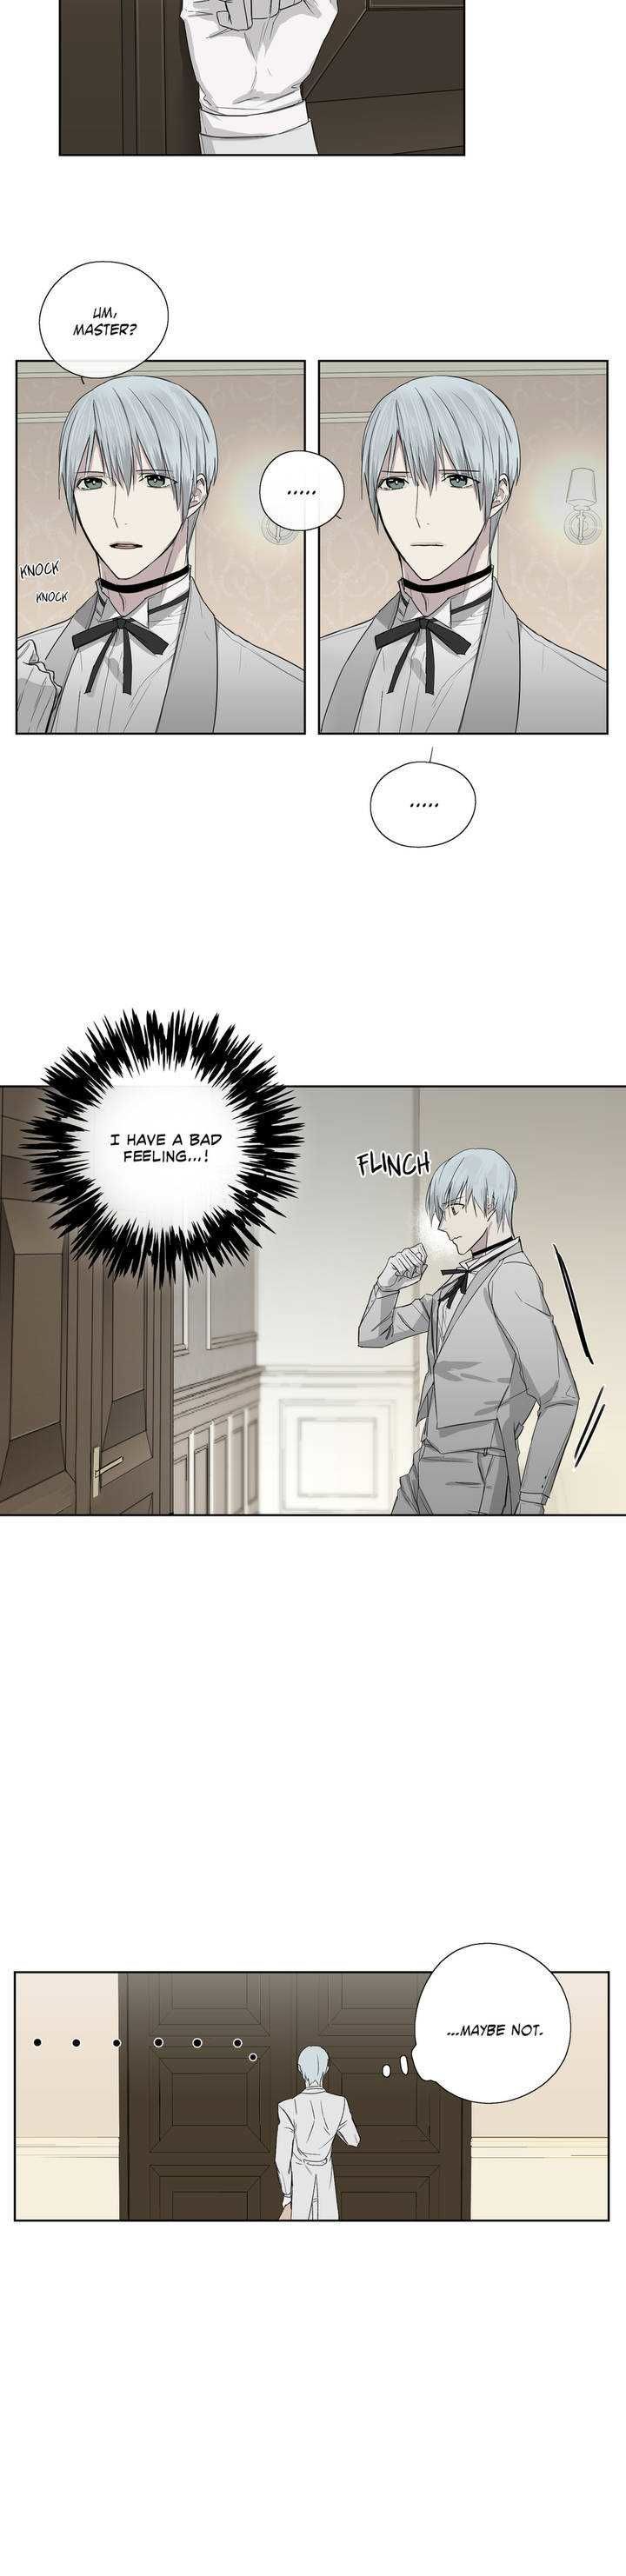 Royal Servant - Chapter 3 Page 17